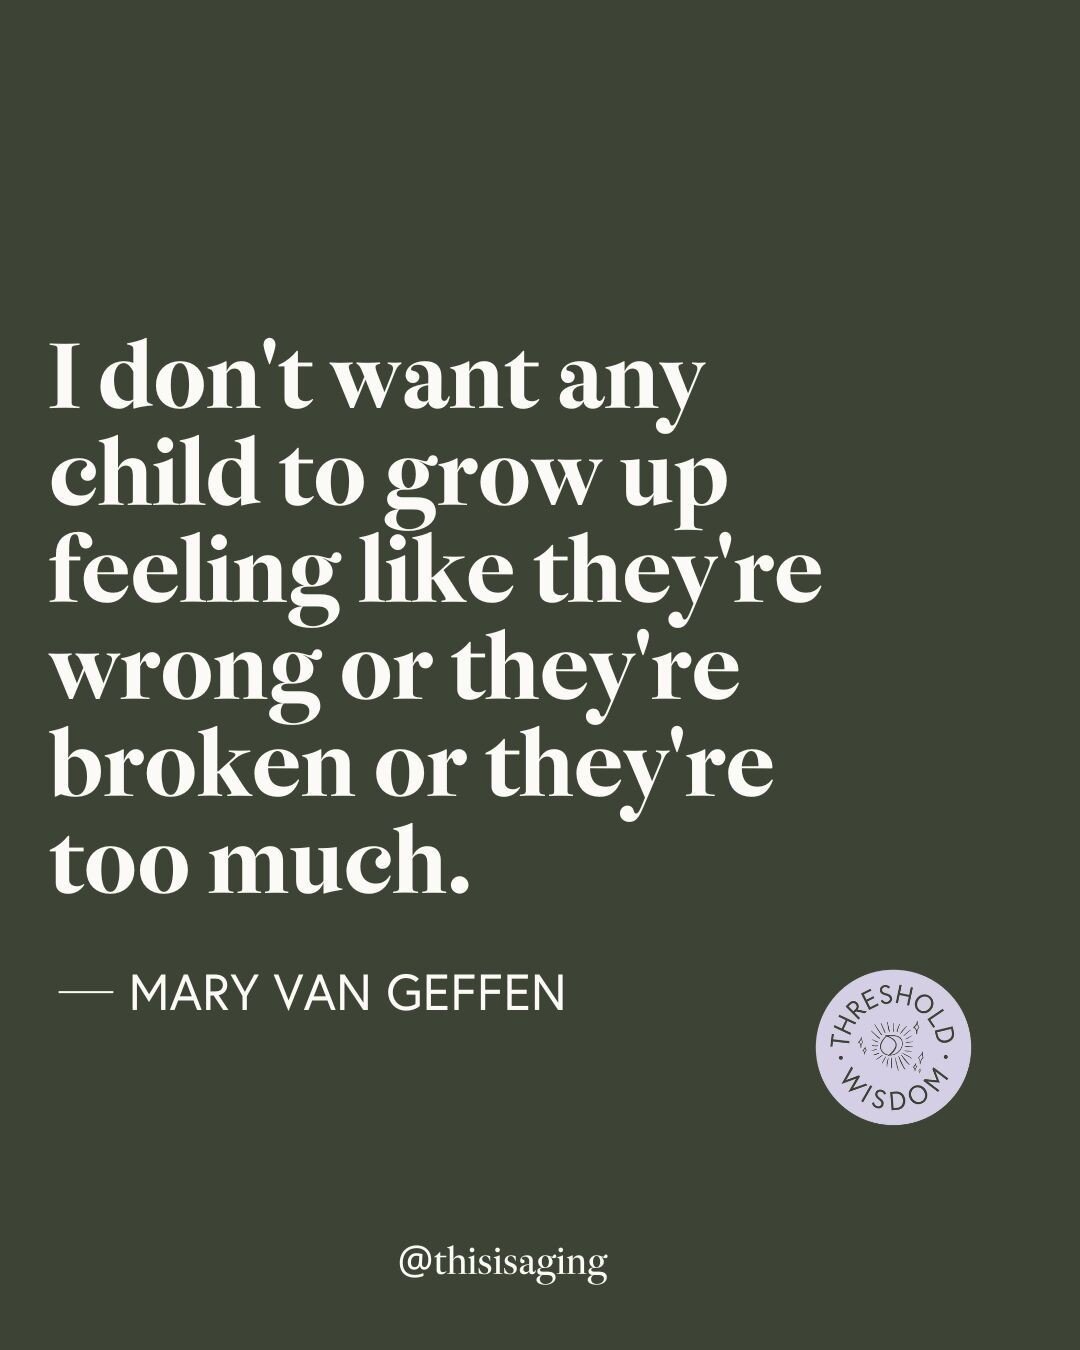 If this hits home, there&rsquo;s a good chance you grew up feeling this way.⁠
⁠
And there&rsquo;s a good chance you have a hard time not reacting in ways that make your kids feel the same way.⁠
⁠
This weeks episode with @maryvangeffen offers some muc